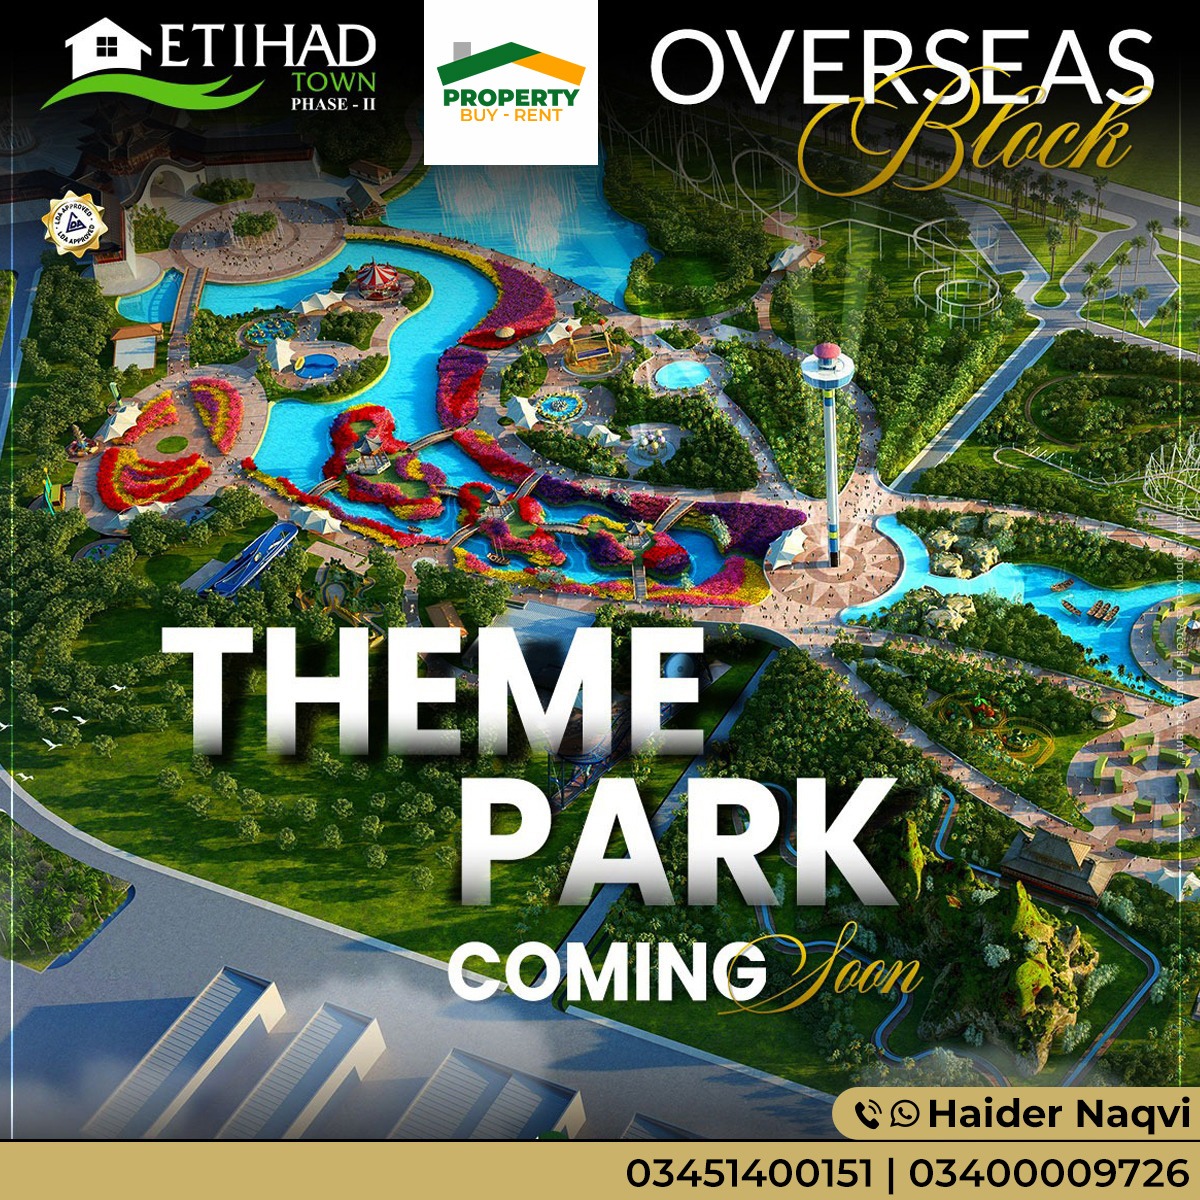 Something incredible in Etihad Town Phase 2, Overseas Block! Brace yourselves for the unveiling of our upcoming projects, including a magnificent Masjid, lush Parks, and more!
#etihadtownphase2 #luxuryliving #comingsoon #realestateinvestment #OVERSEASBLOCK #investmentopportunity